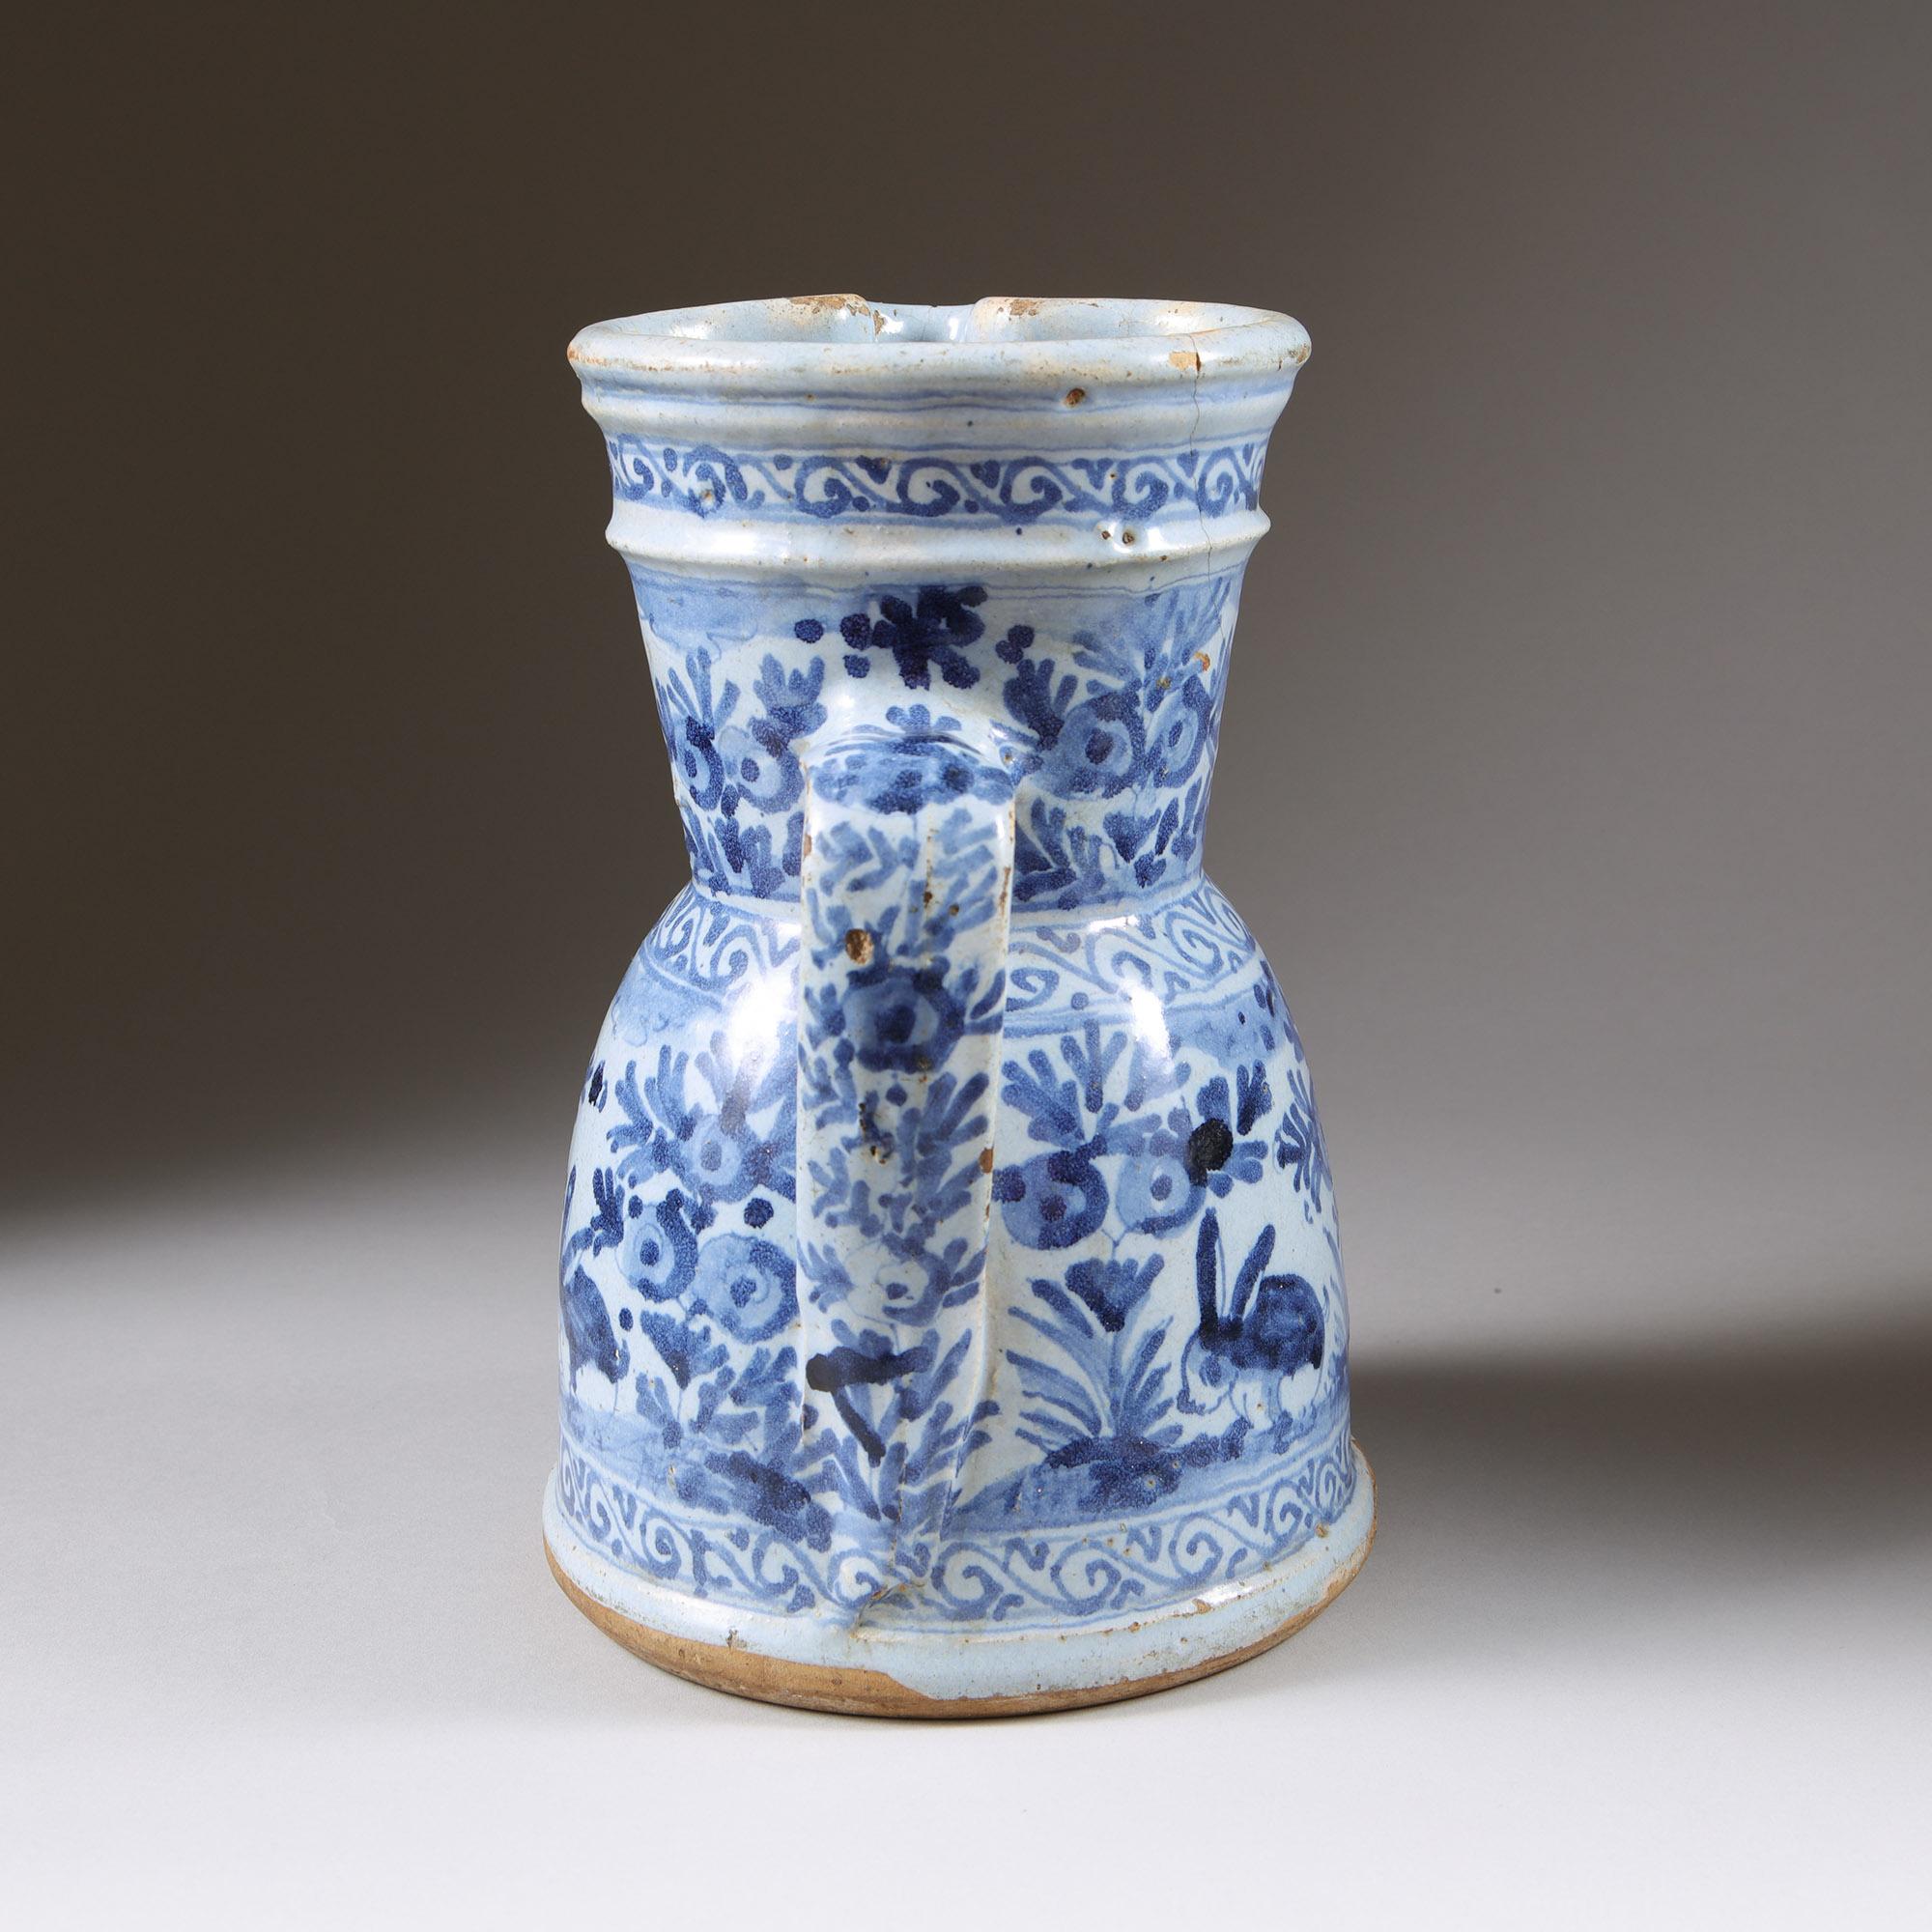 An unusual late 17th early 18th century Delft jug In Good Condition For Sale In Oxfordshire, United Kingdom